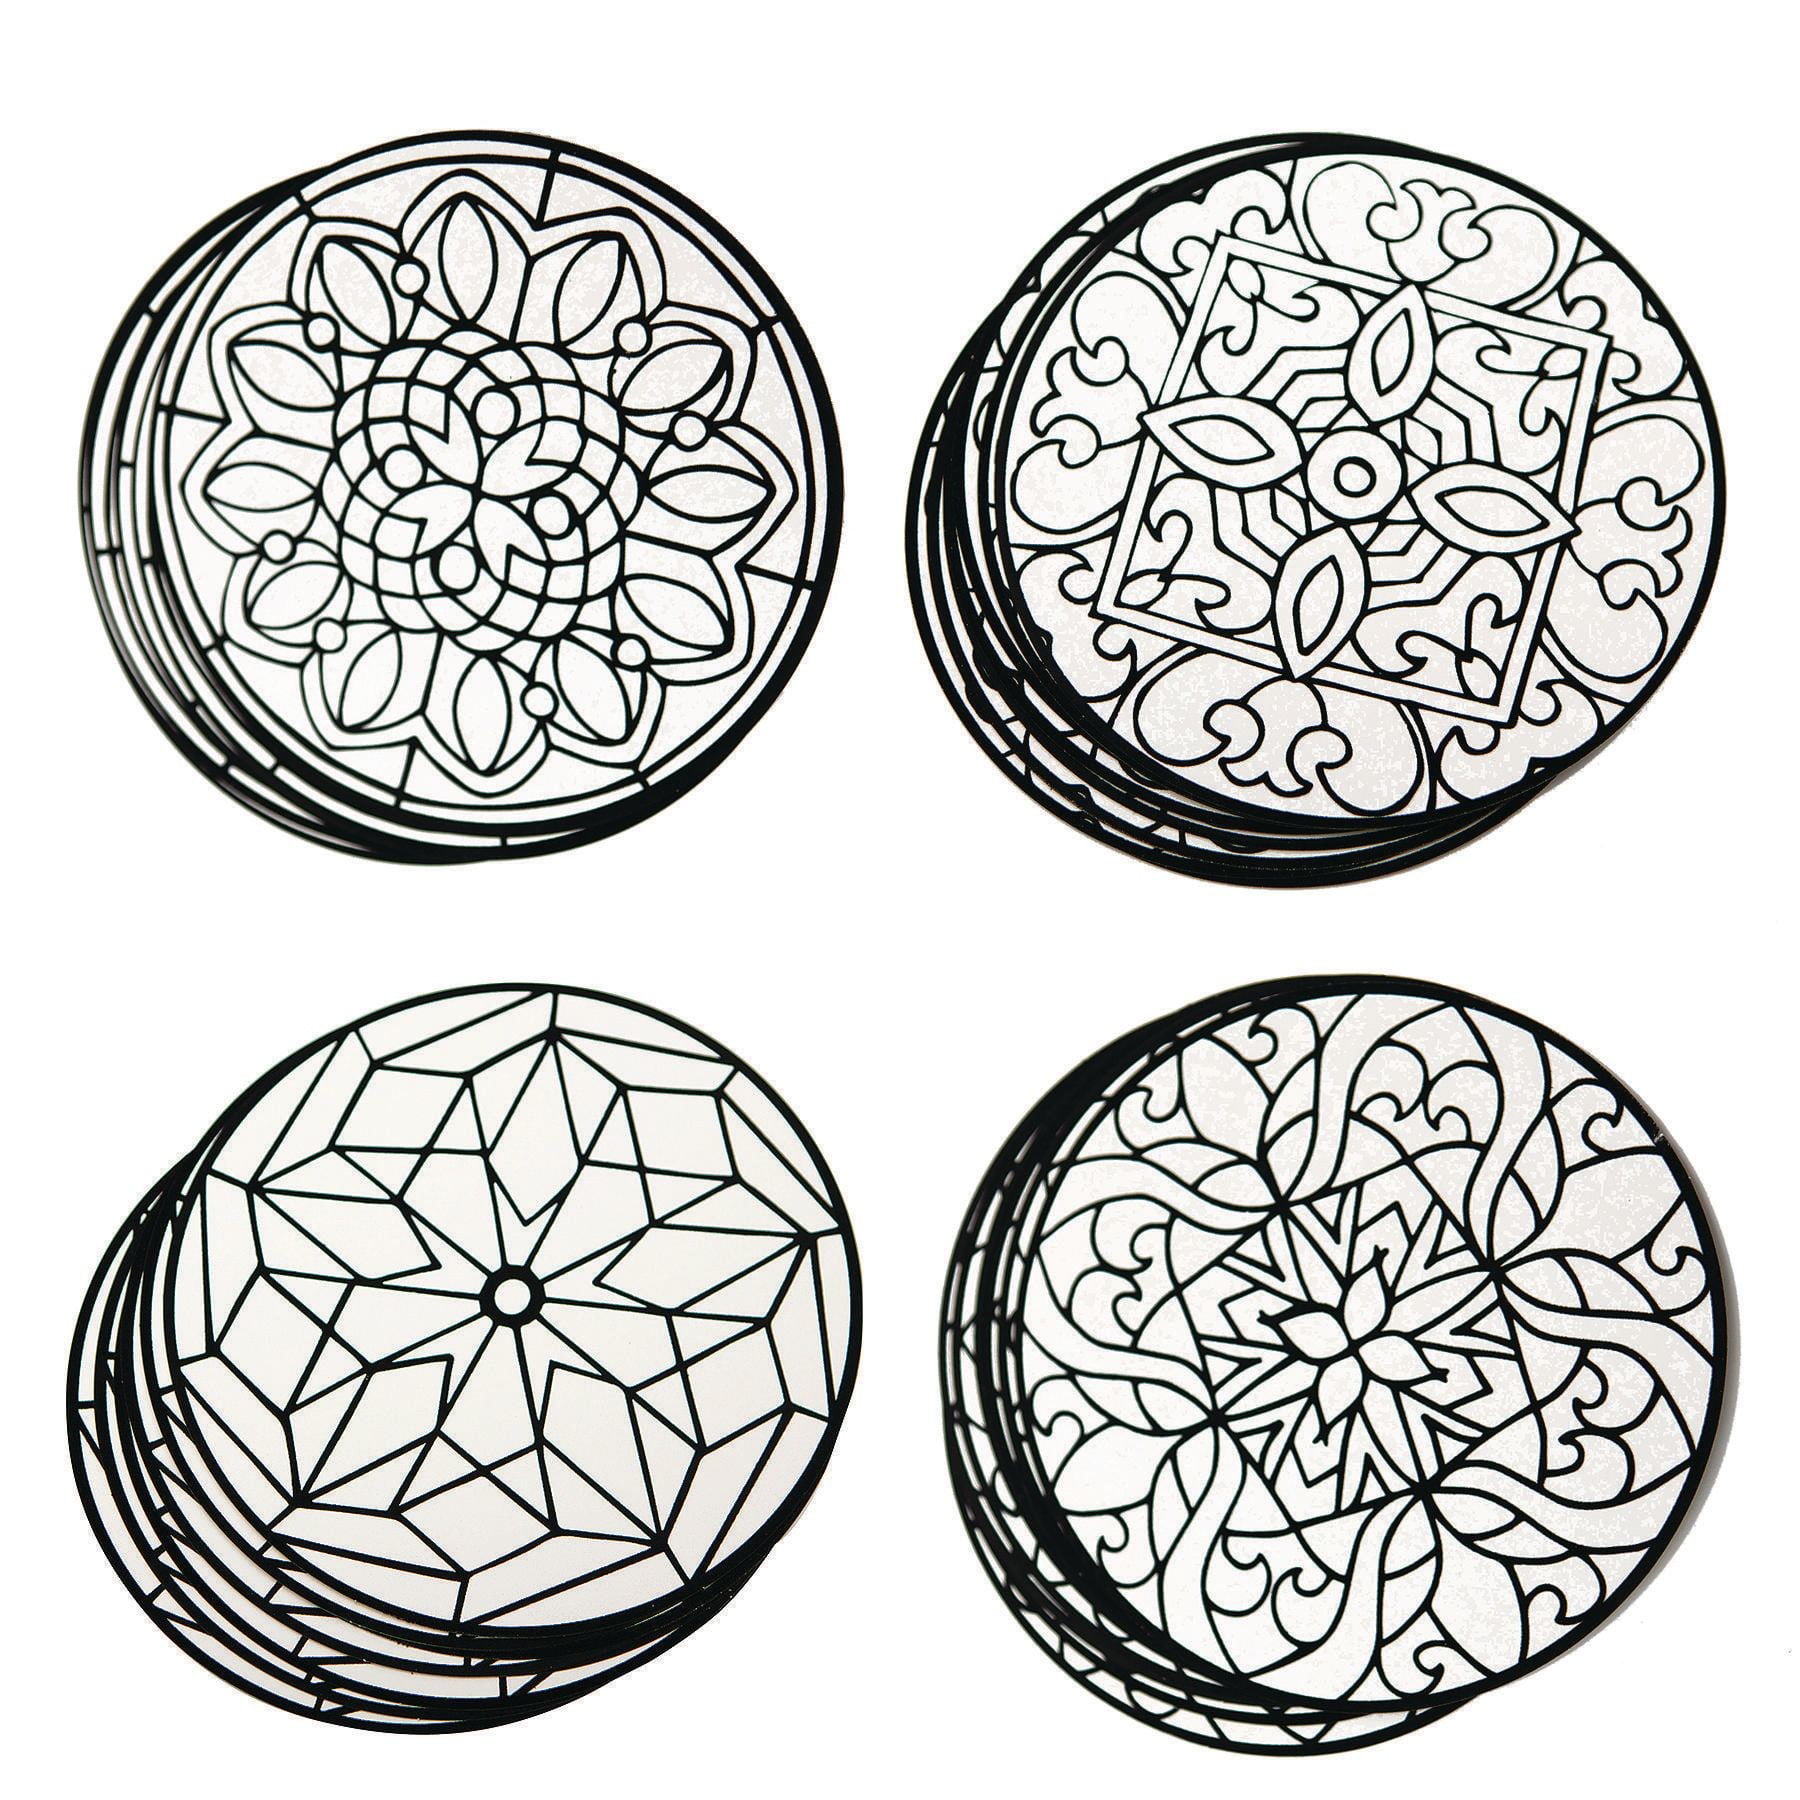 S&S Worldwide Velvet Art Mandalas to Color, 10 each of 4 Designs,  Classically Detailed Designs, Color with Markers or Colored Pencils, 9  Diameter Cardstock Pack of 40. 